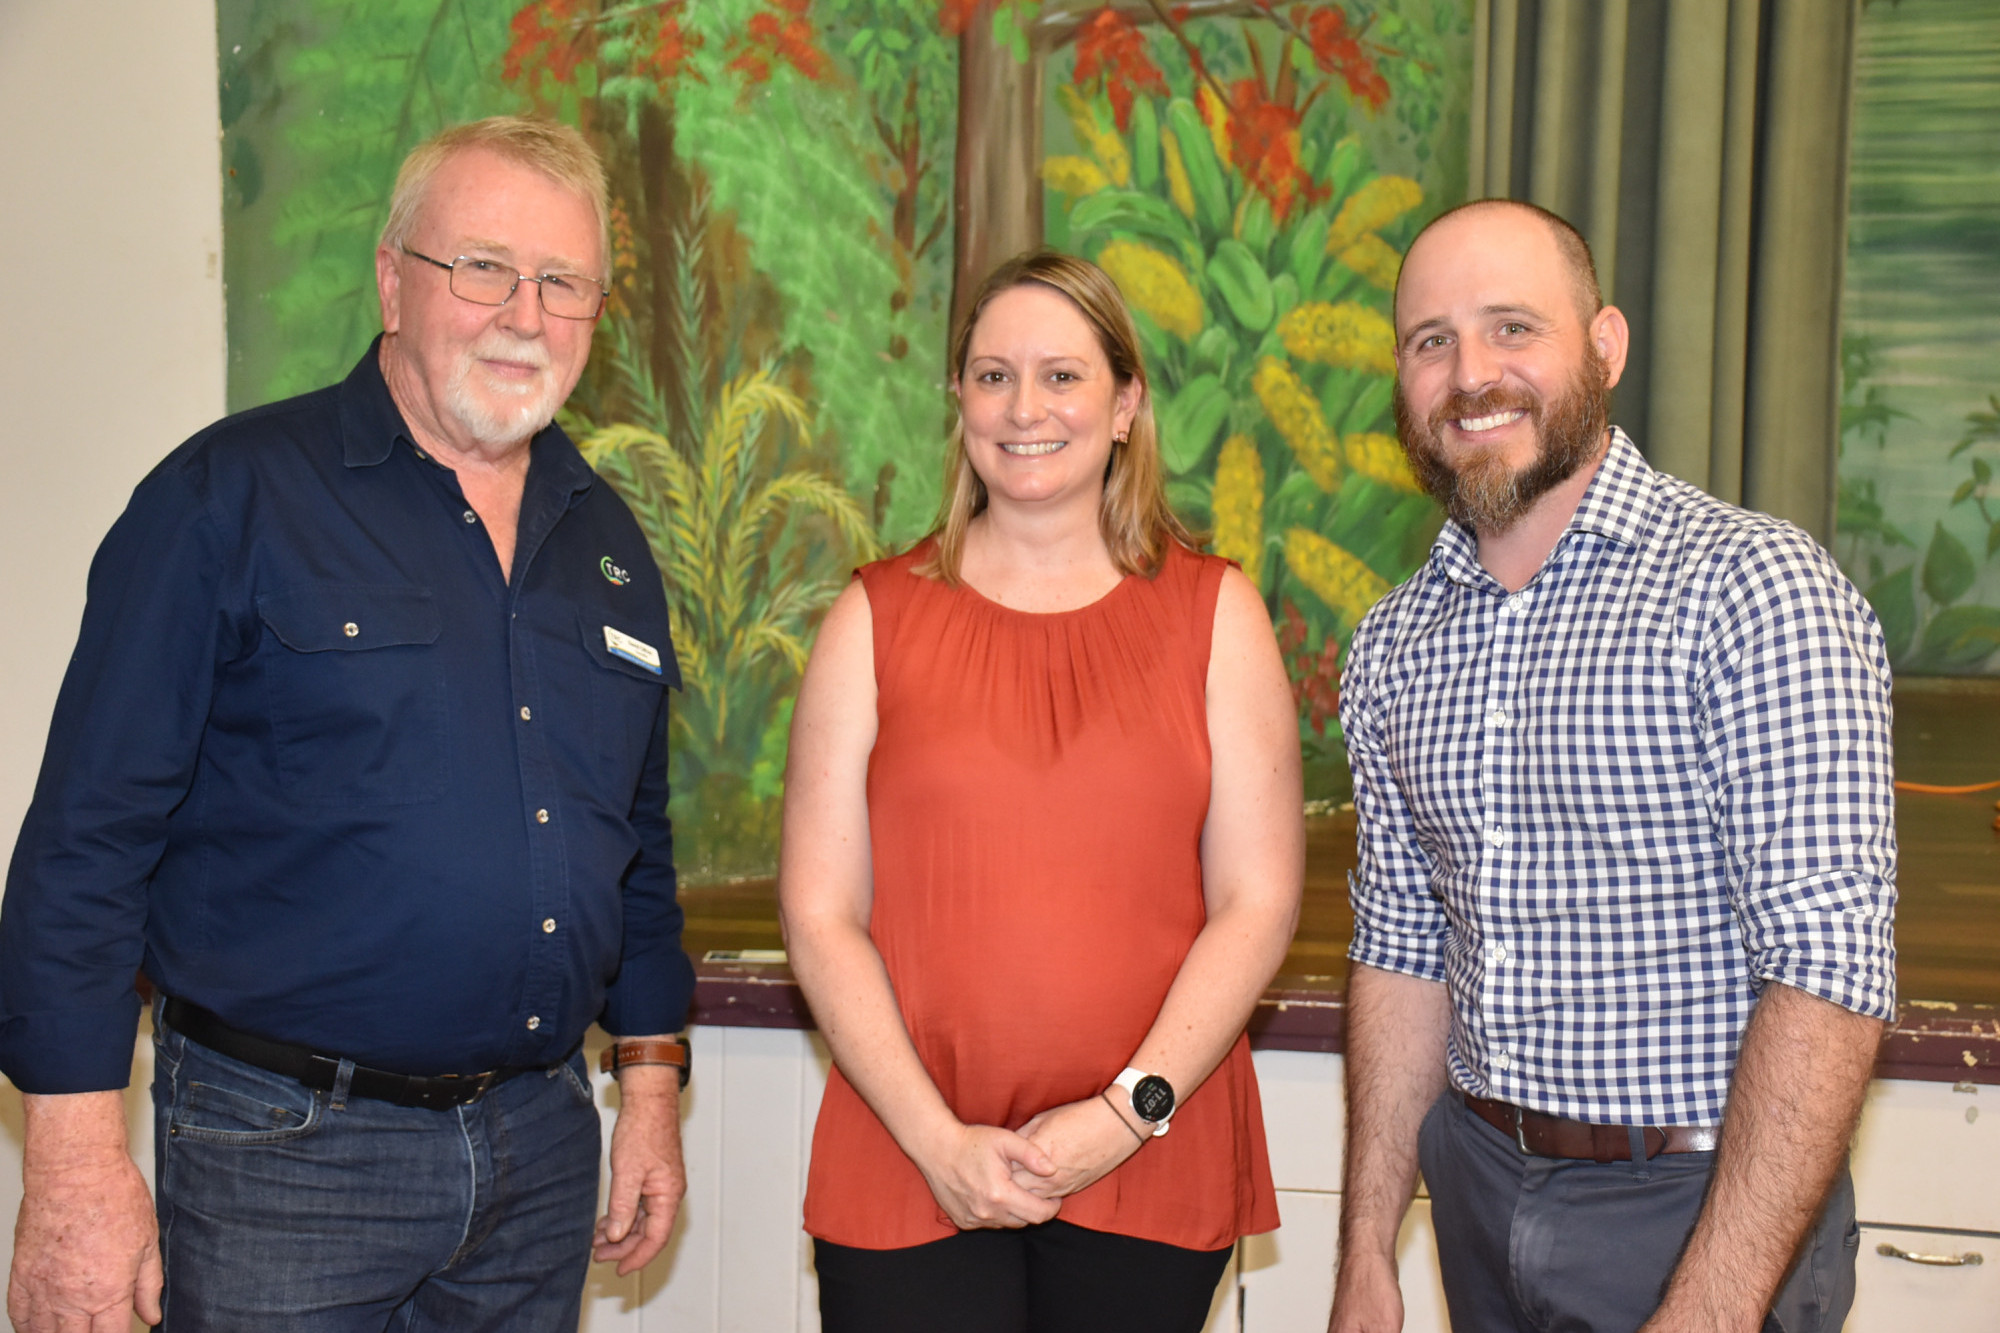 Councillor David Clifton with Susie Laurance and Jonathan Mueller from C7even at the Yungaburra meet and greet.